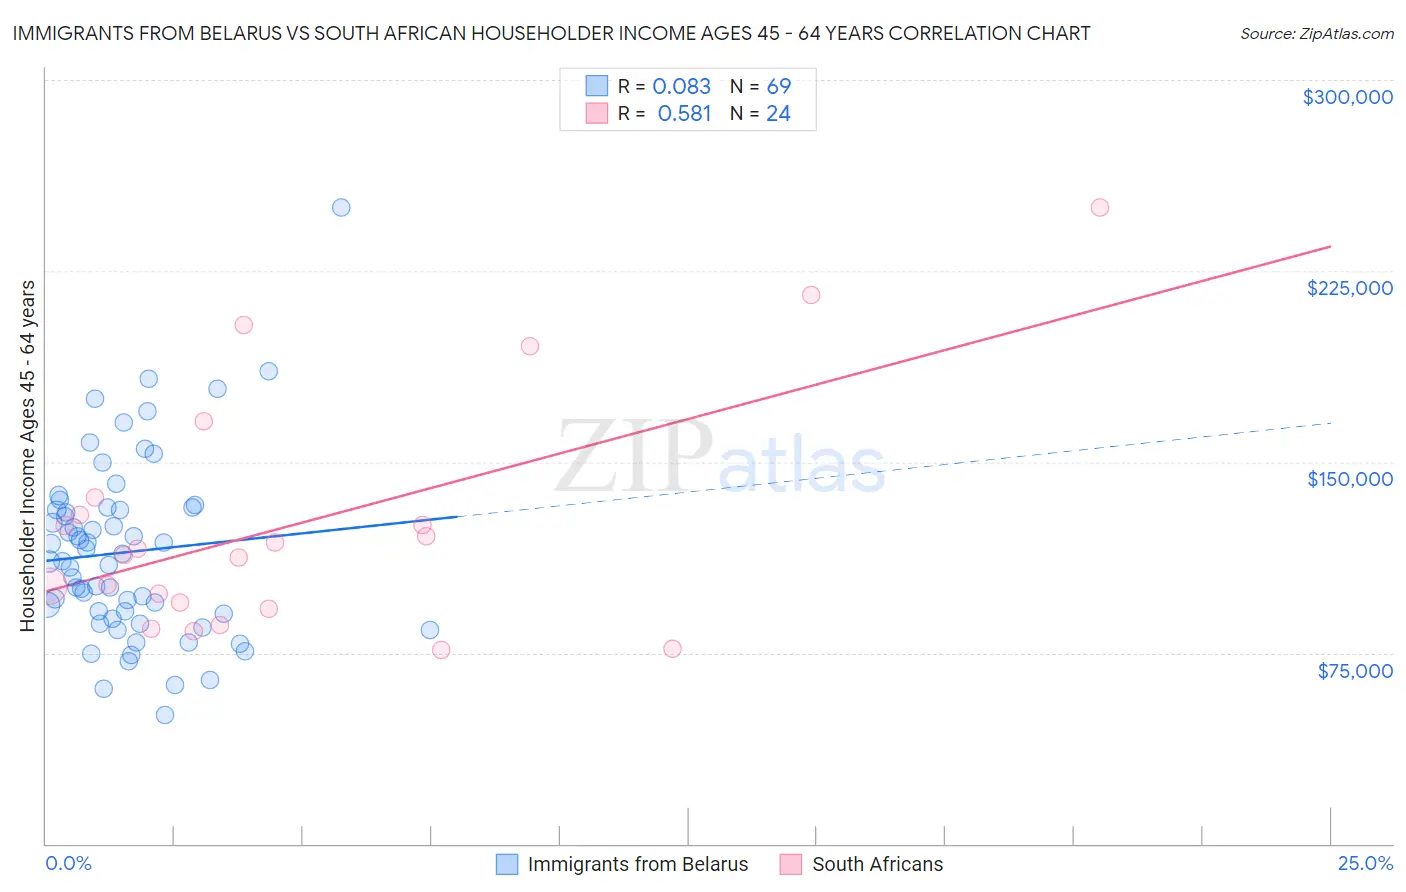 Immigrants from Belarus vs South African Householder Income Ages 45 - 64 years